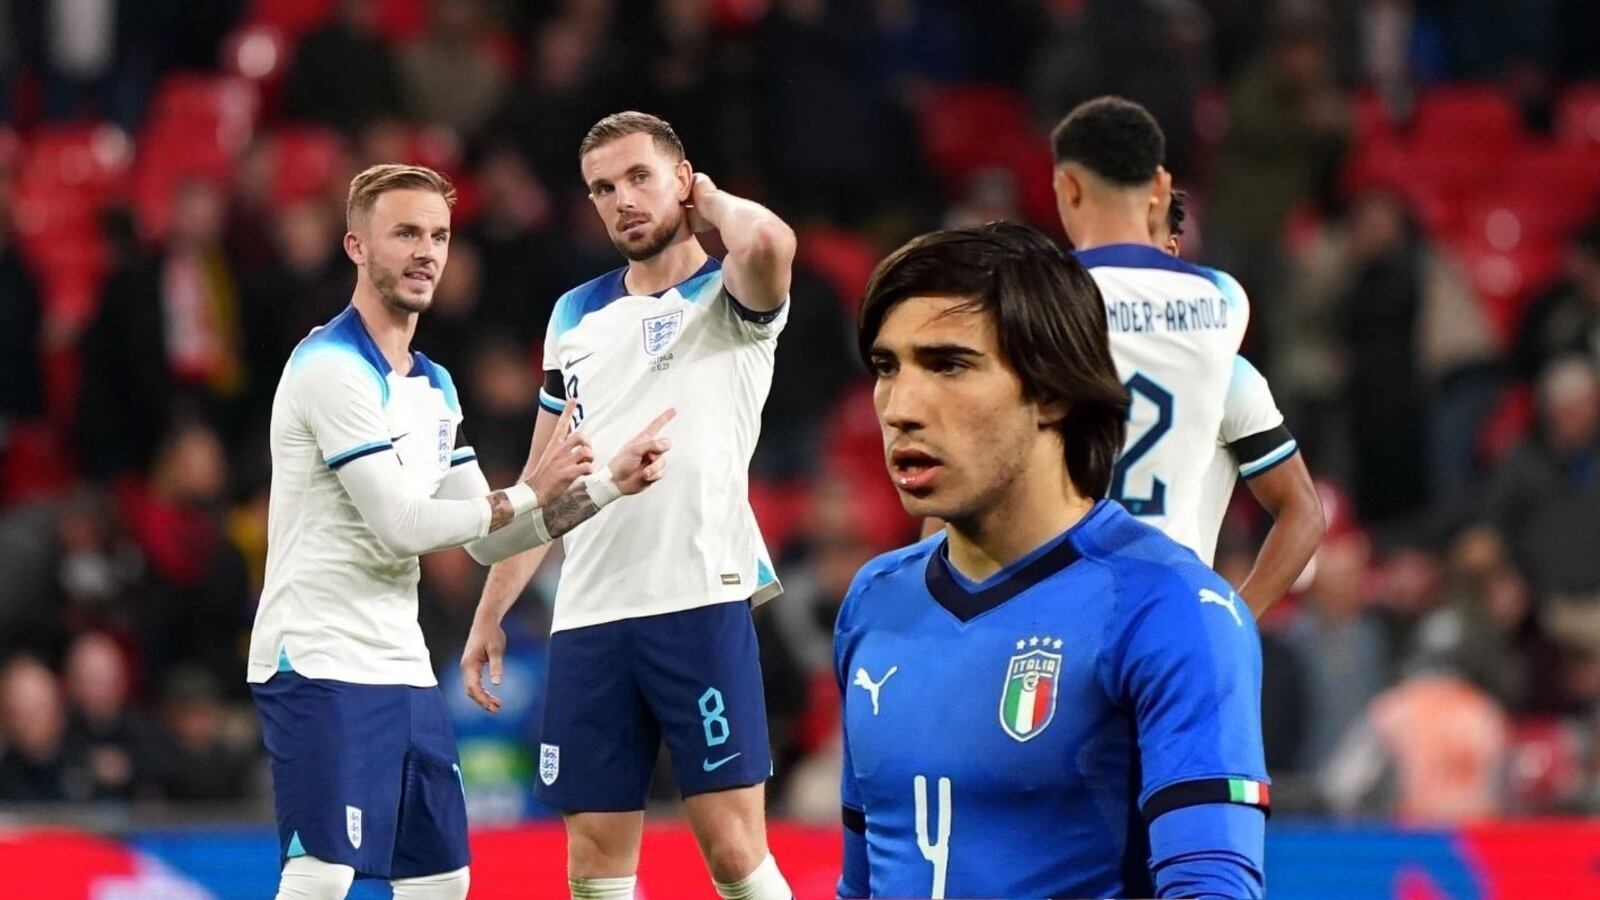 England vs Italy are facing tomorrow: Check where you can watch this match LIVE